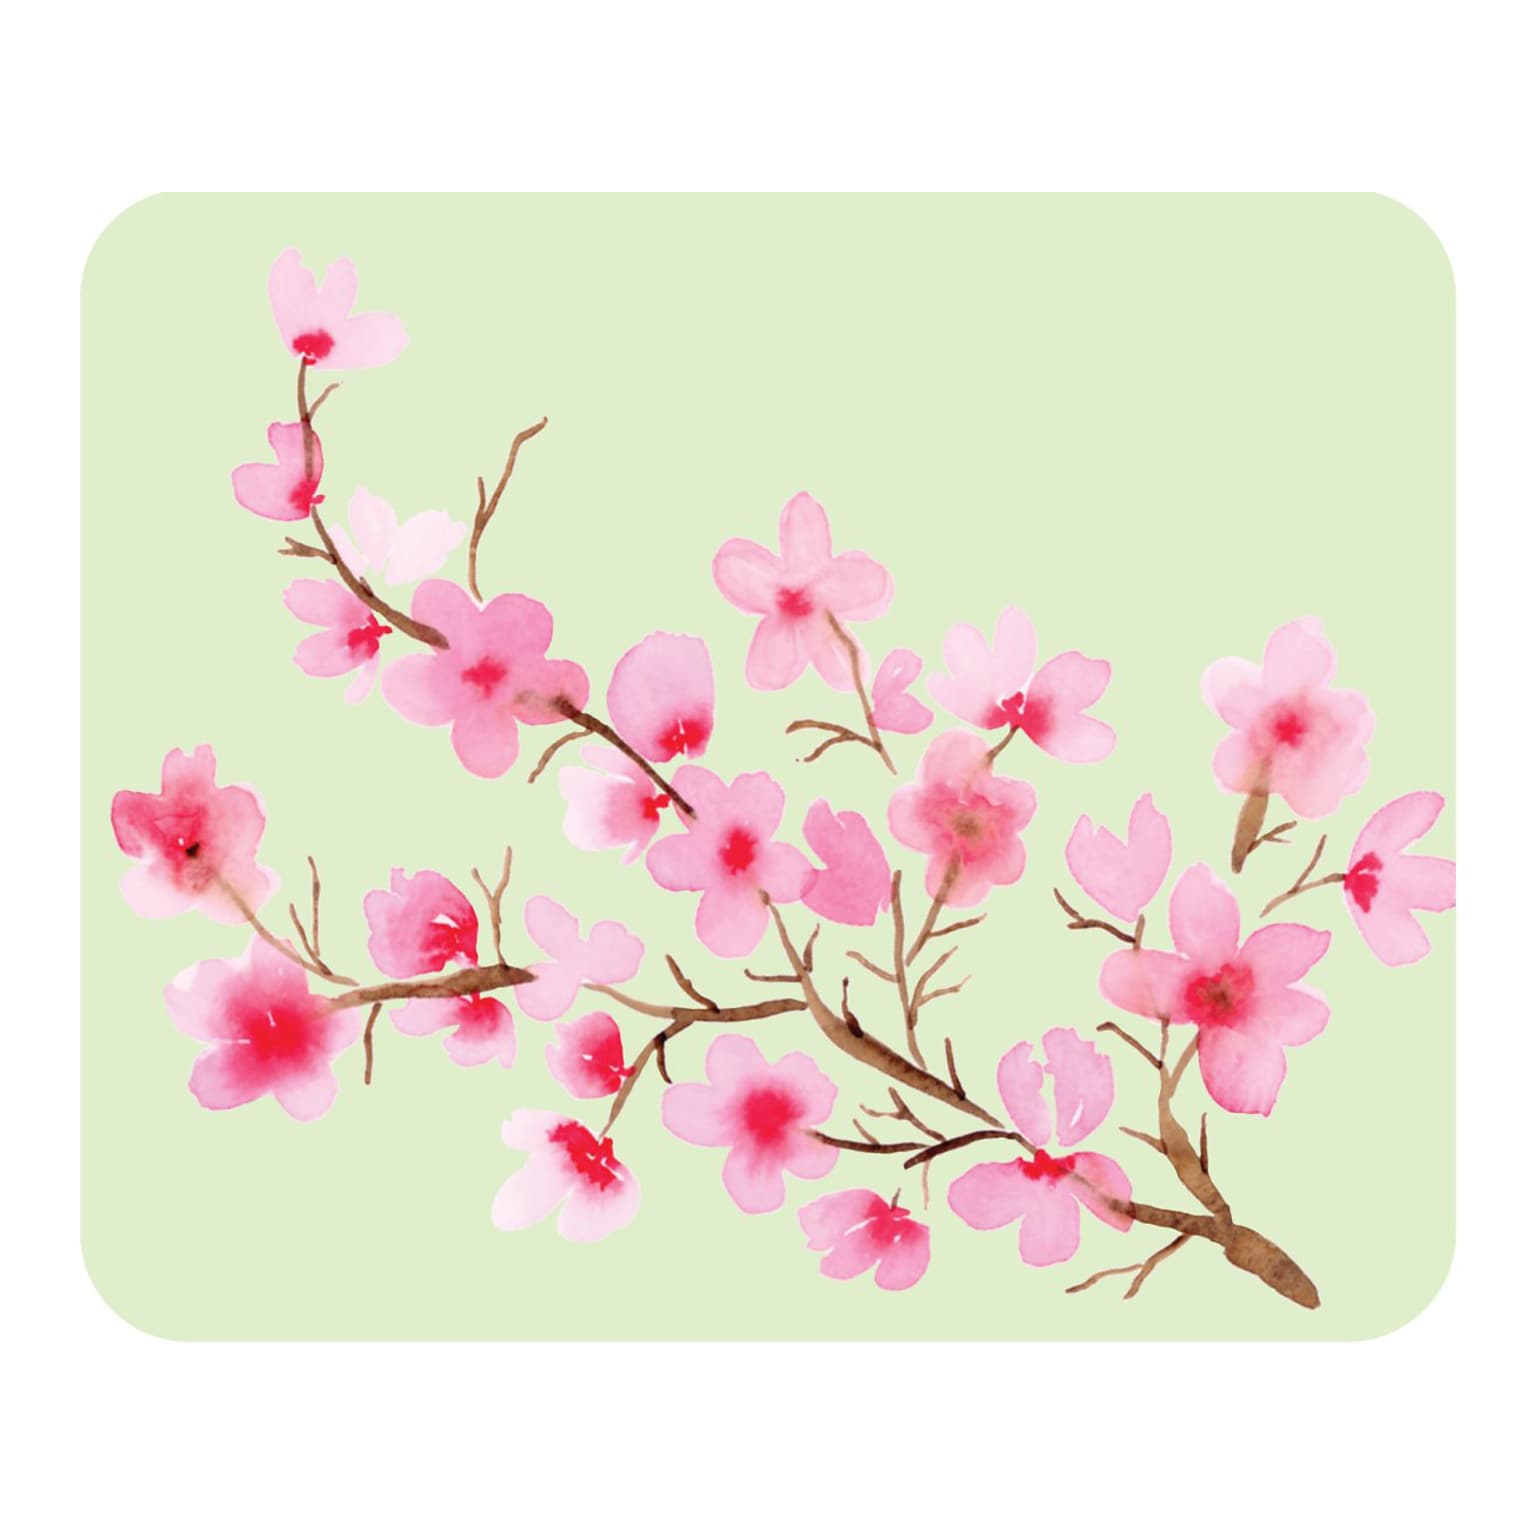 OTM Essentials Prints Cherry Blossoms Mouse Pad, Green/Pink/Brown (OP-MH-A03-12A)